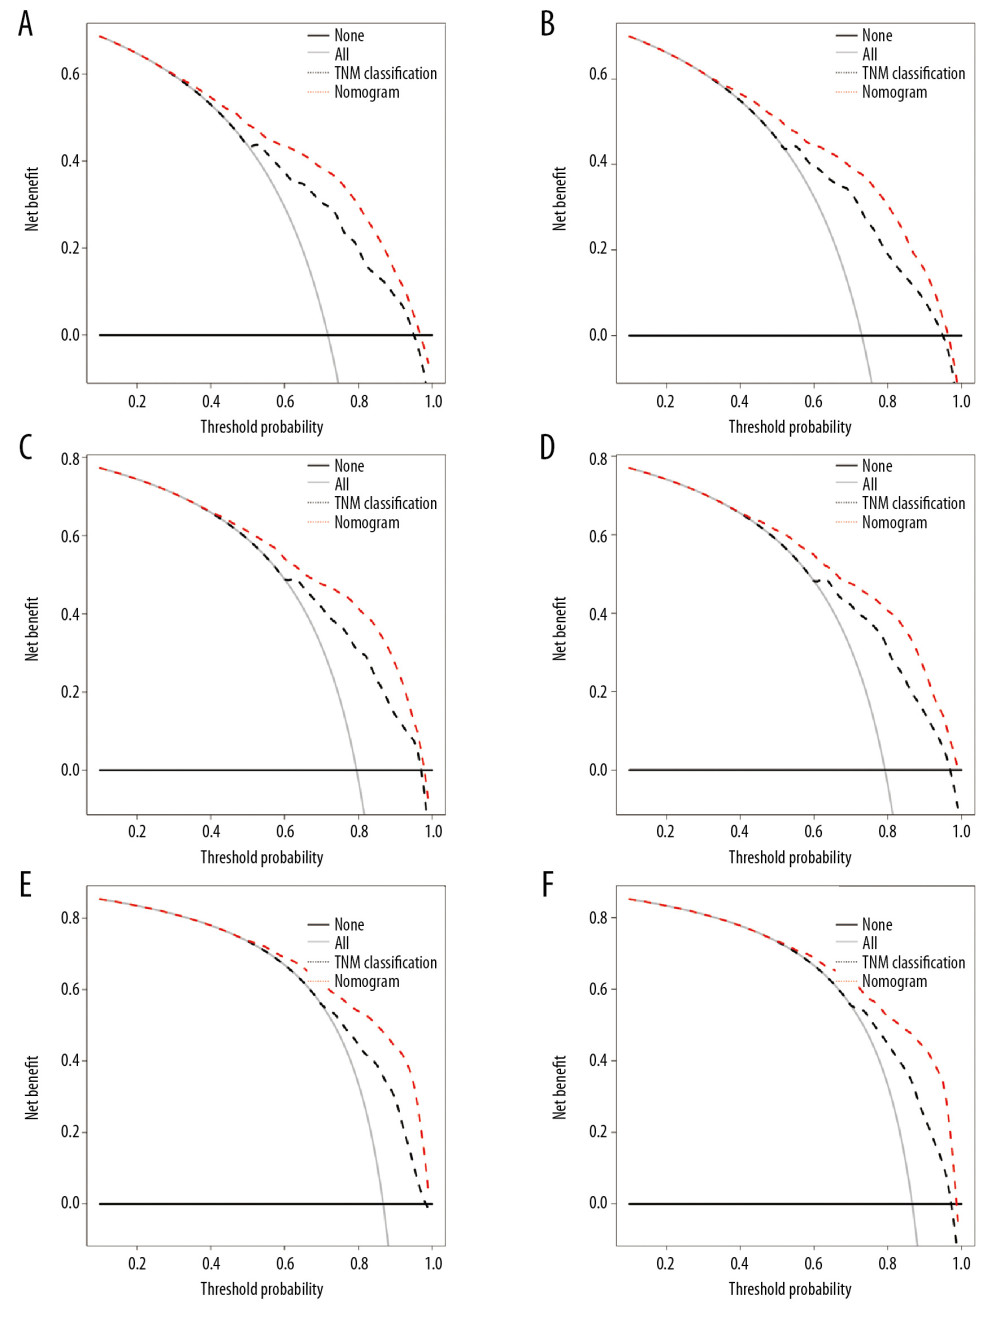 The decision curve analysis (DCA) for the training cohort (A, C, E) and validation cohort (B, D, F) for the 3-year, 5-year, and 10-year overall survival (OS). In the figure, the red dotted line represents the new nomogram model. The black dotted line represents the TNM classification. All – assume all patients with papillary RCC survive; None – assume no patient with papillary RCC survived; DCA – decision curve analysis.